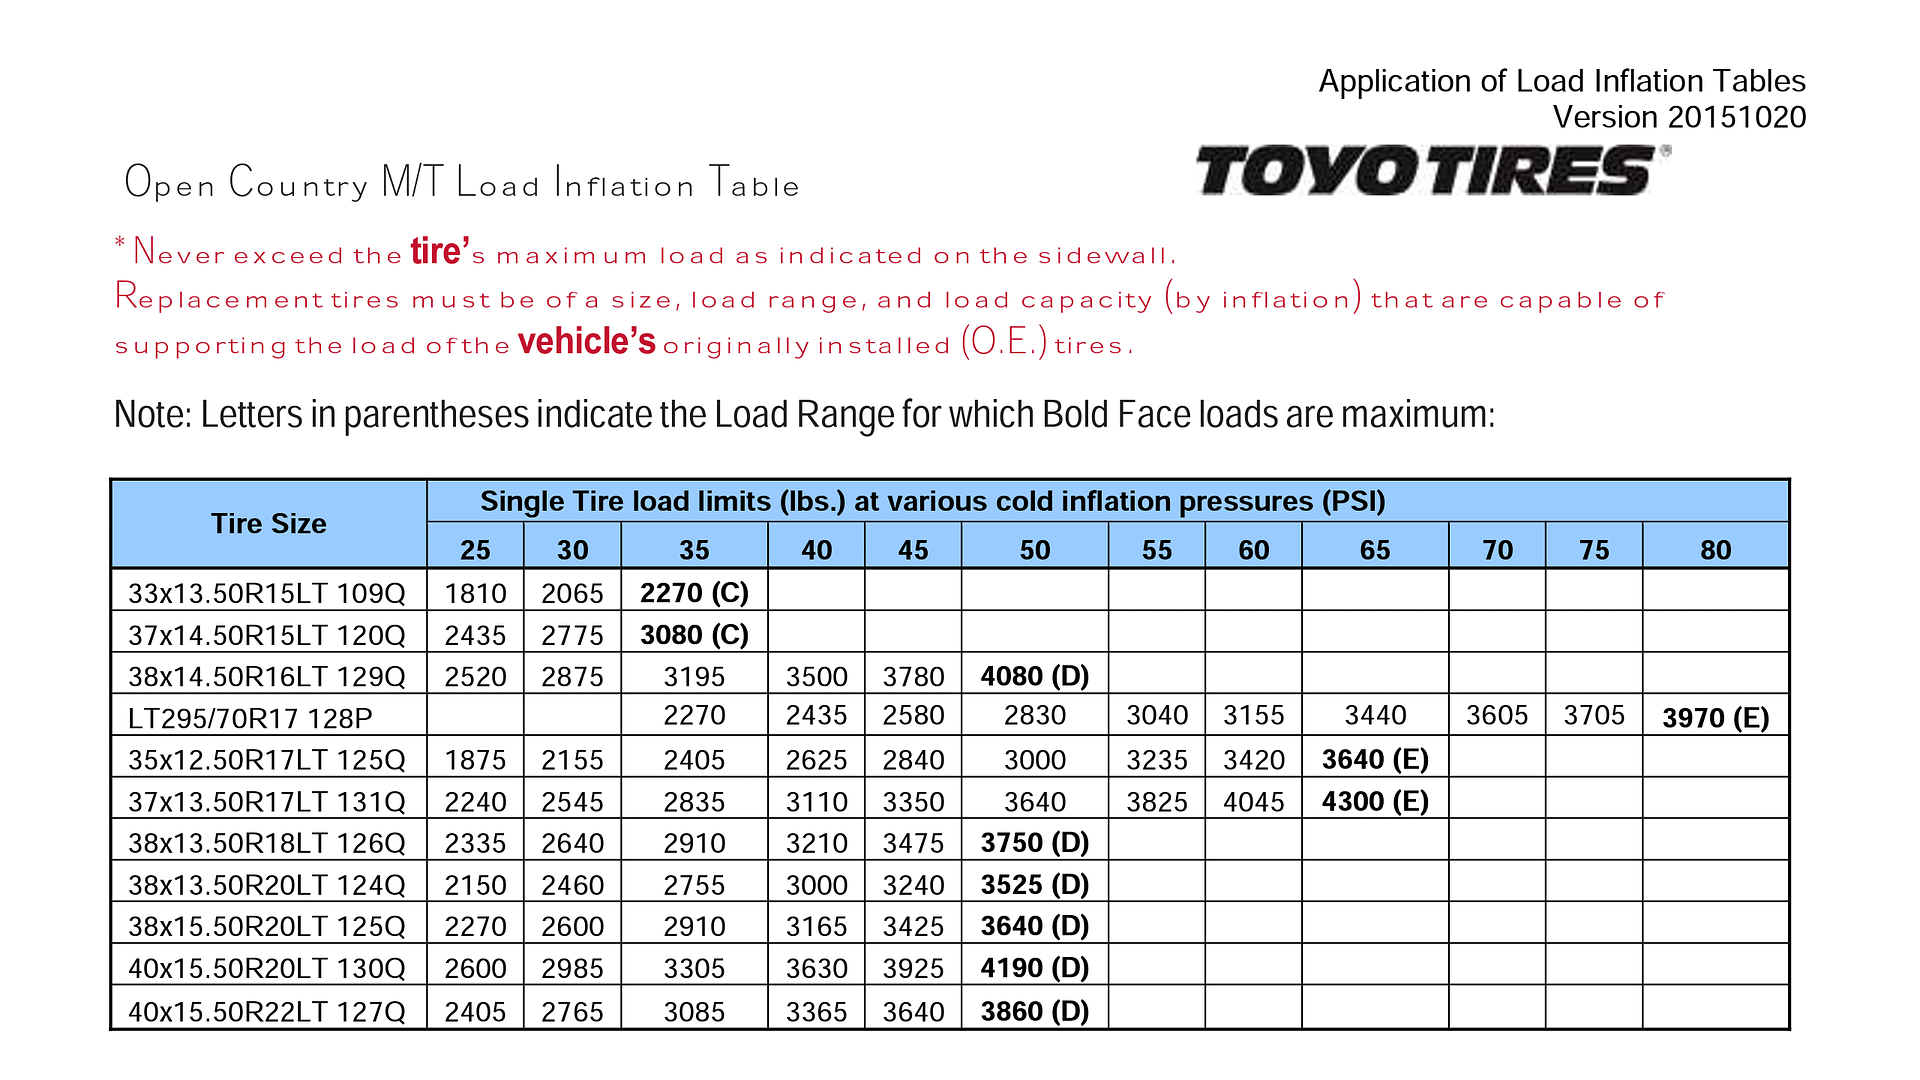 Nitto Tire Inflation Chart